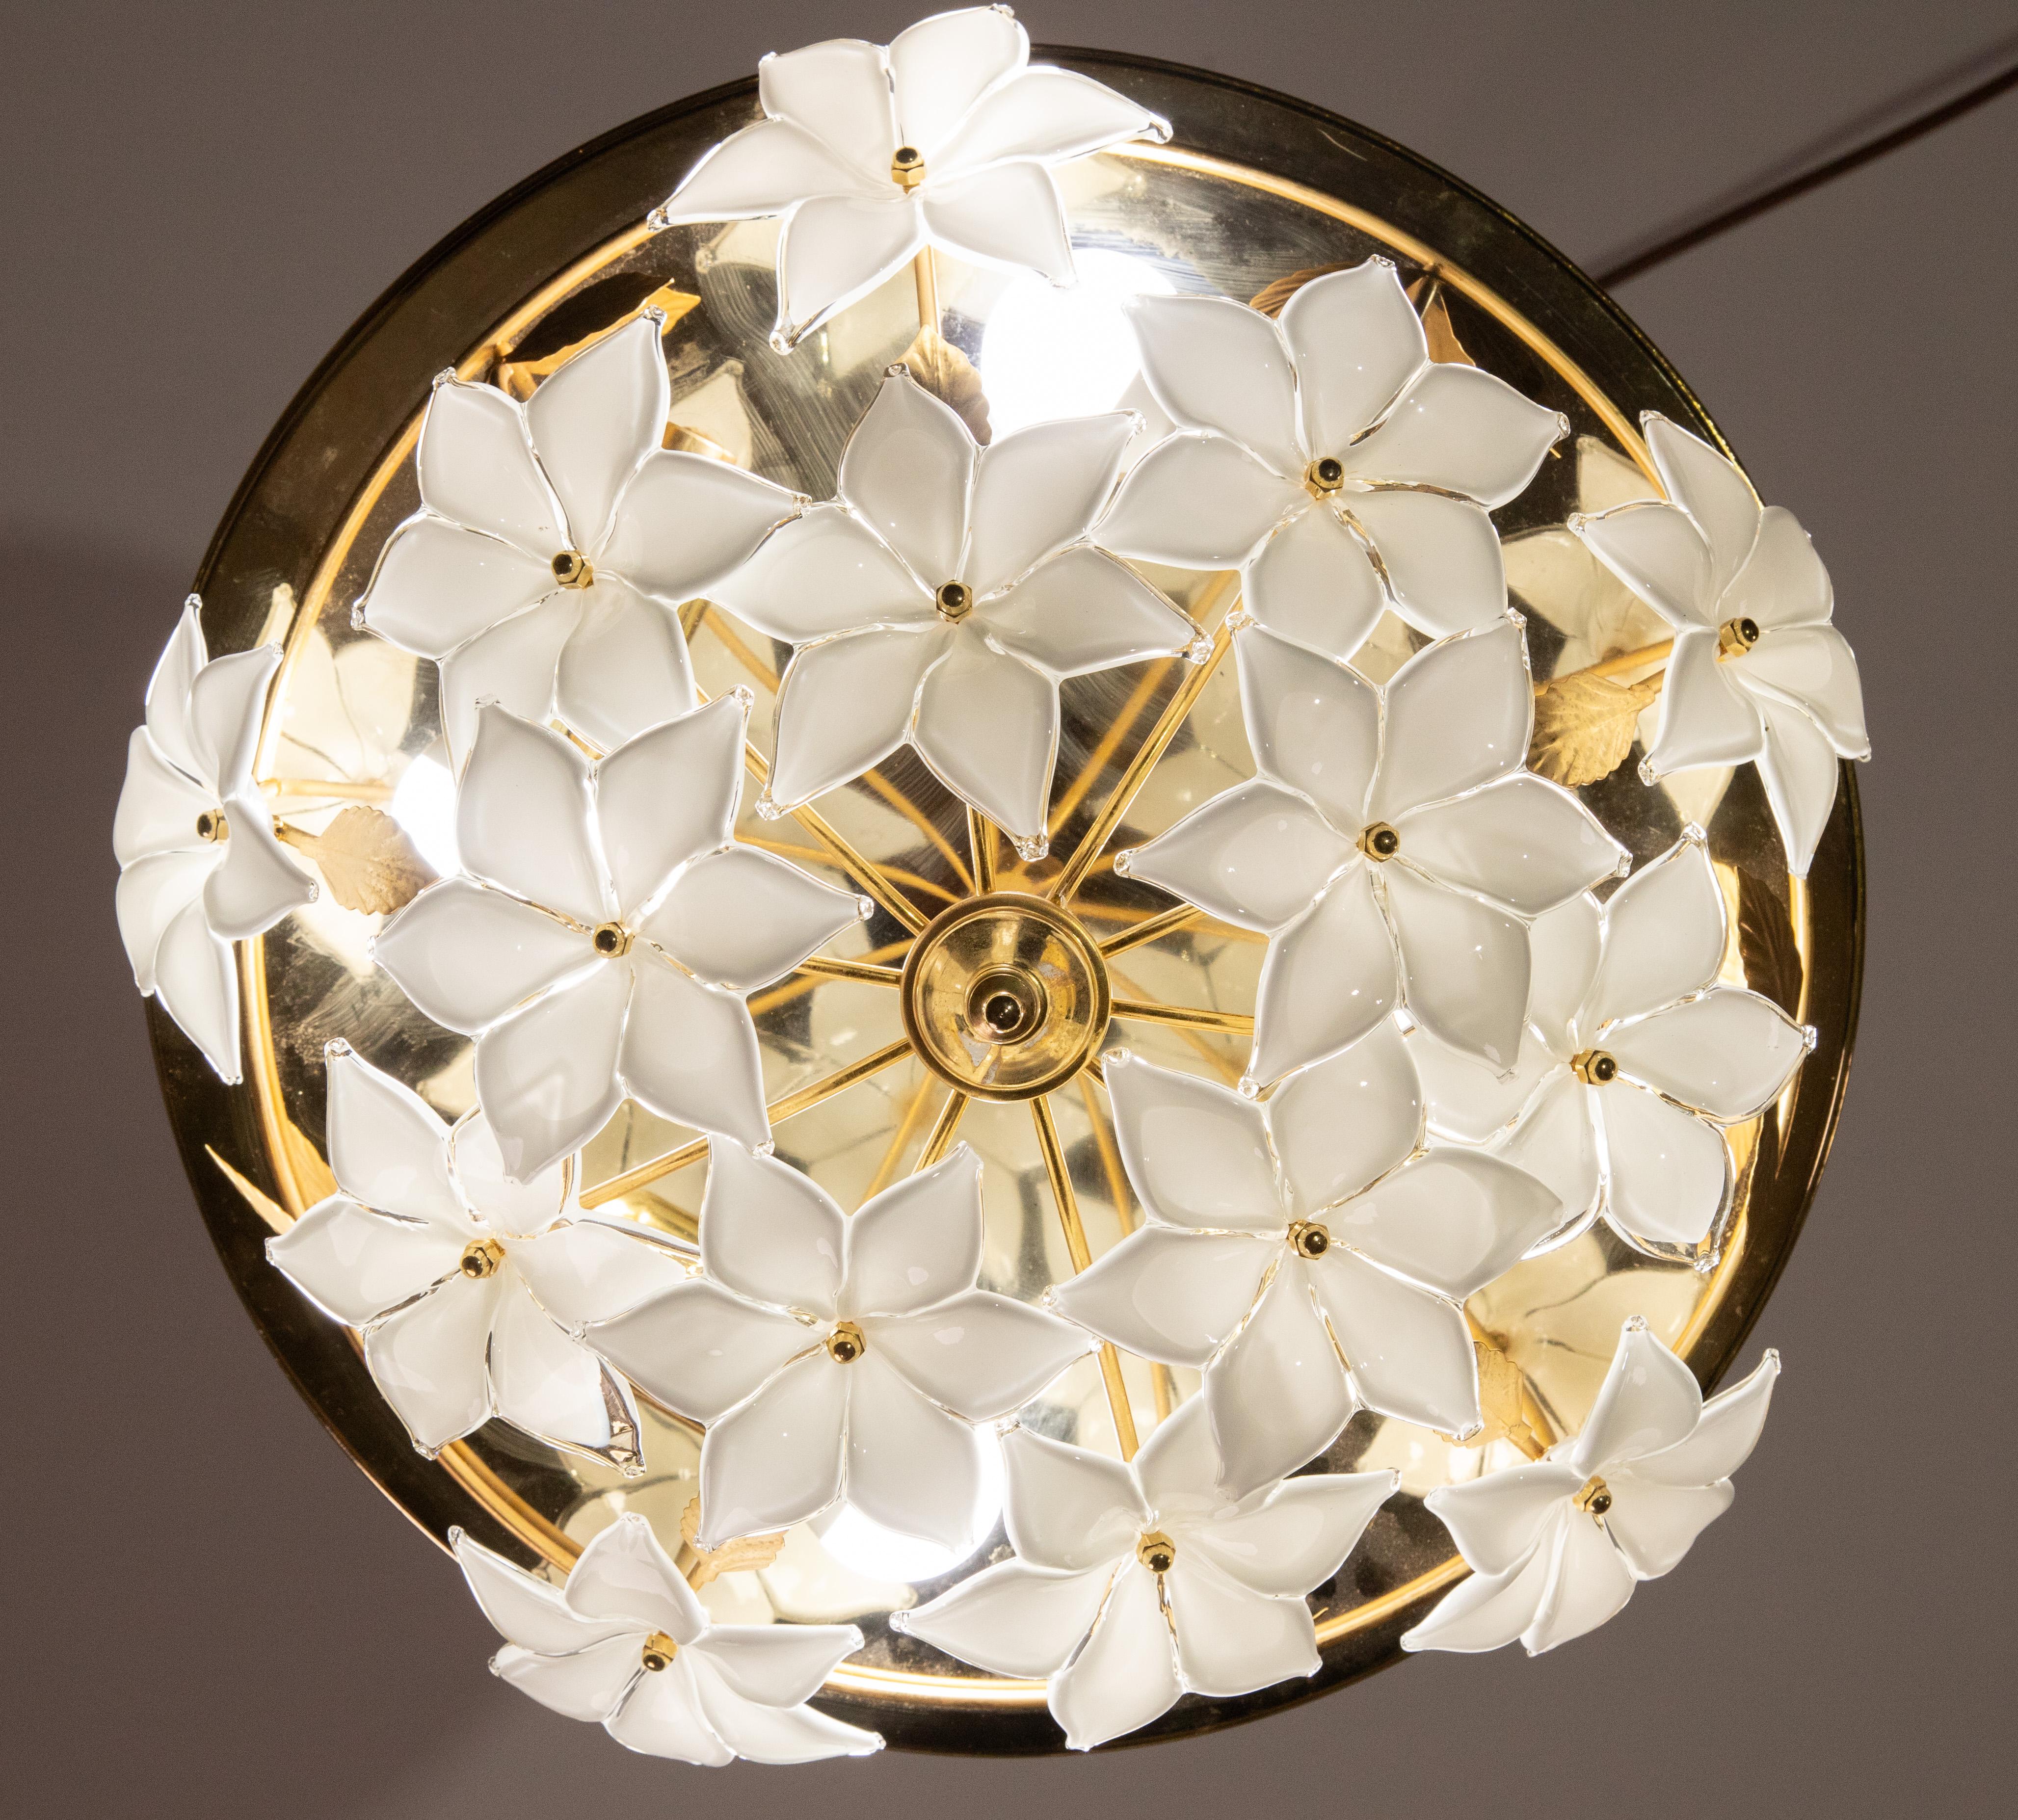 Gorgeous white flowers Murano ceiling light.
The ceiling light mounts 4 lamp holders with E14 socket, possible to switch for USA.
Very good condition of the flowers, the flowers are all handmade so they are unique because they are a little different